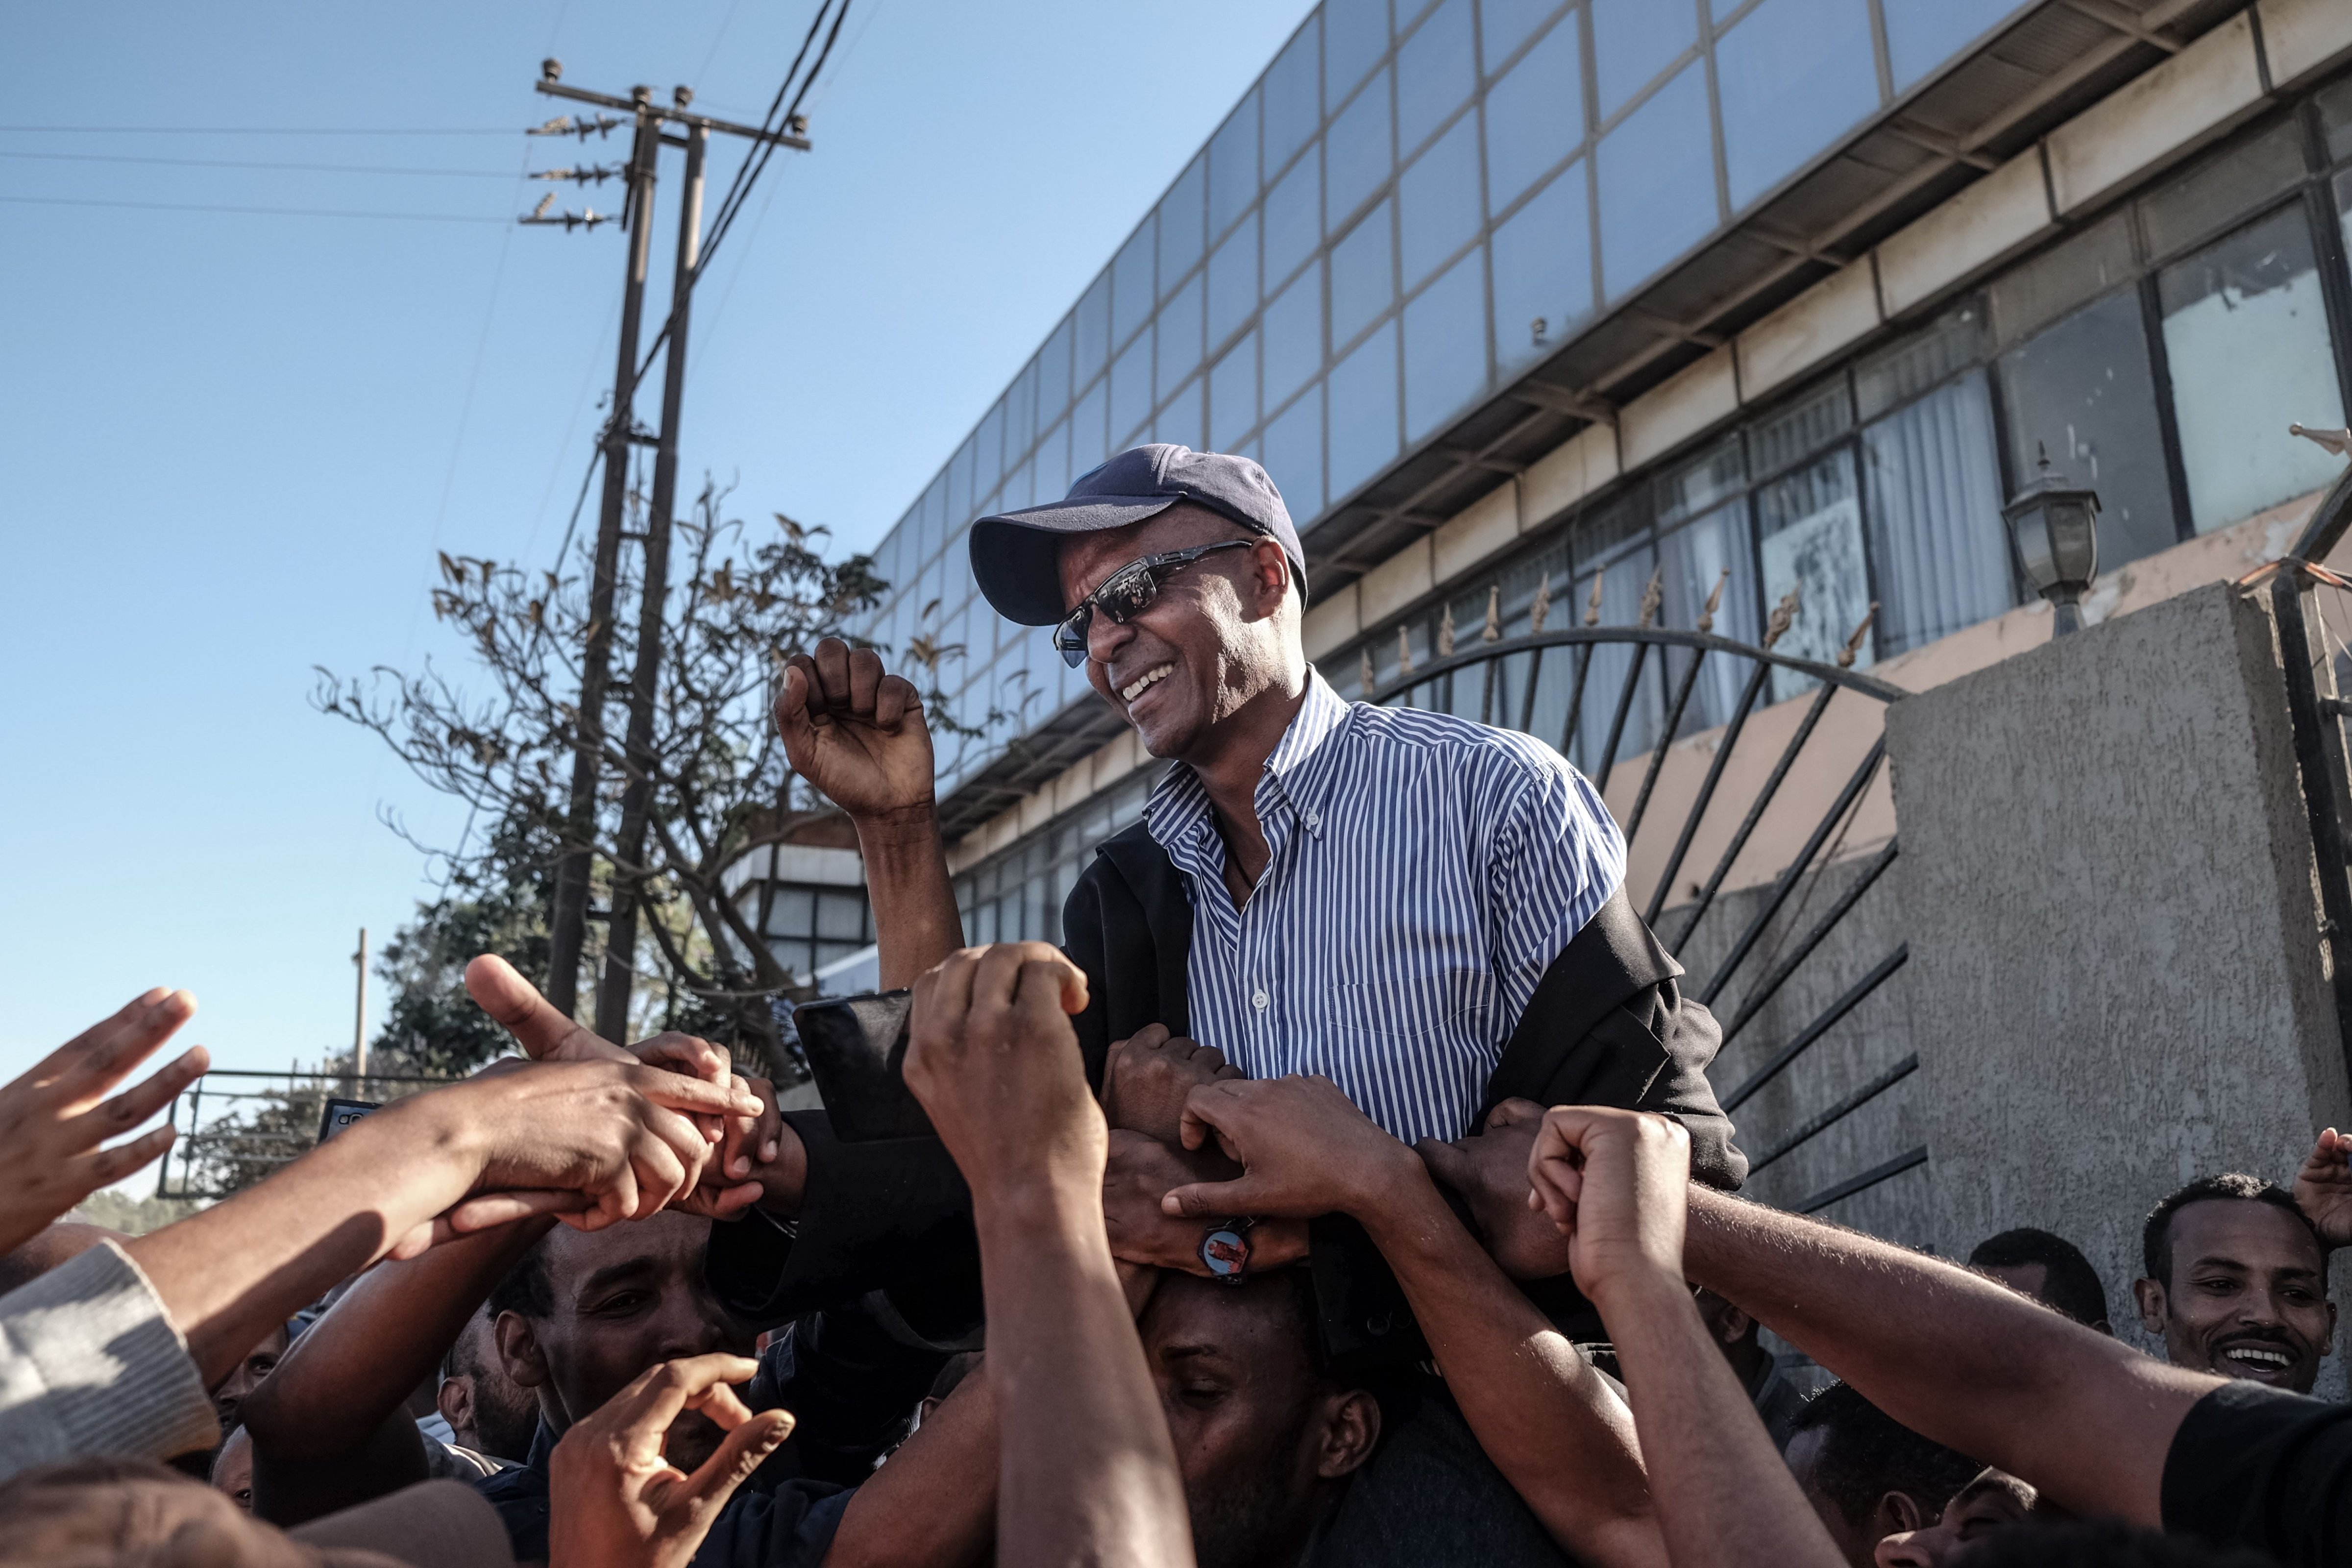 Ethiopian journalist Eskinder Nega, who was given an 18-year prison sentence in 2012 on accusations of links to the banned Ginbot 7 group, reacts with people after being released from Kaliti Prison in Addis Ababa on February 14, 2018. (Yonas Tadesse –AFP/Getty Images)